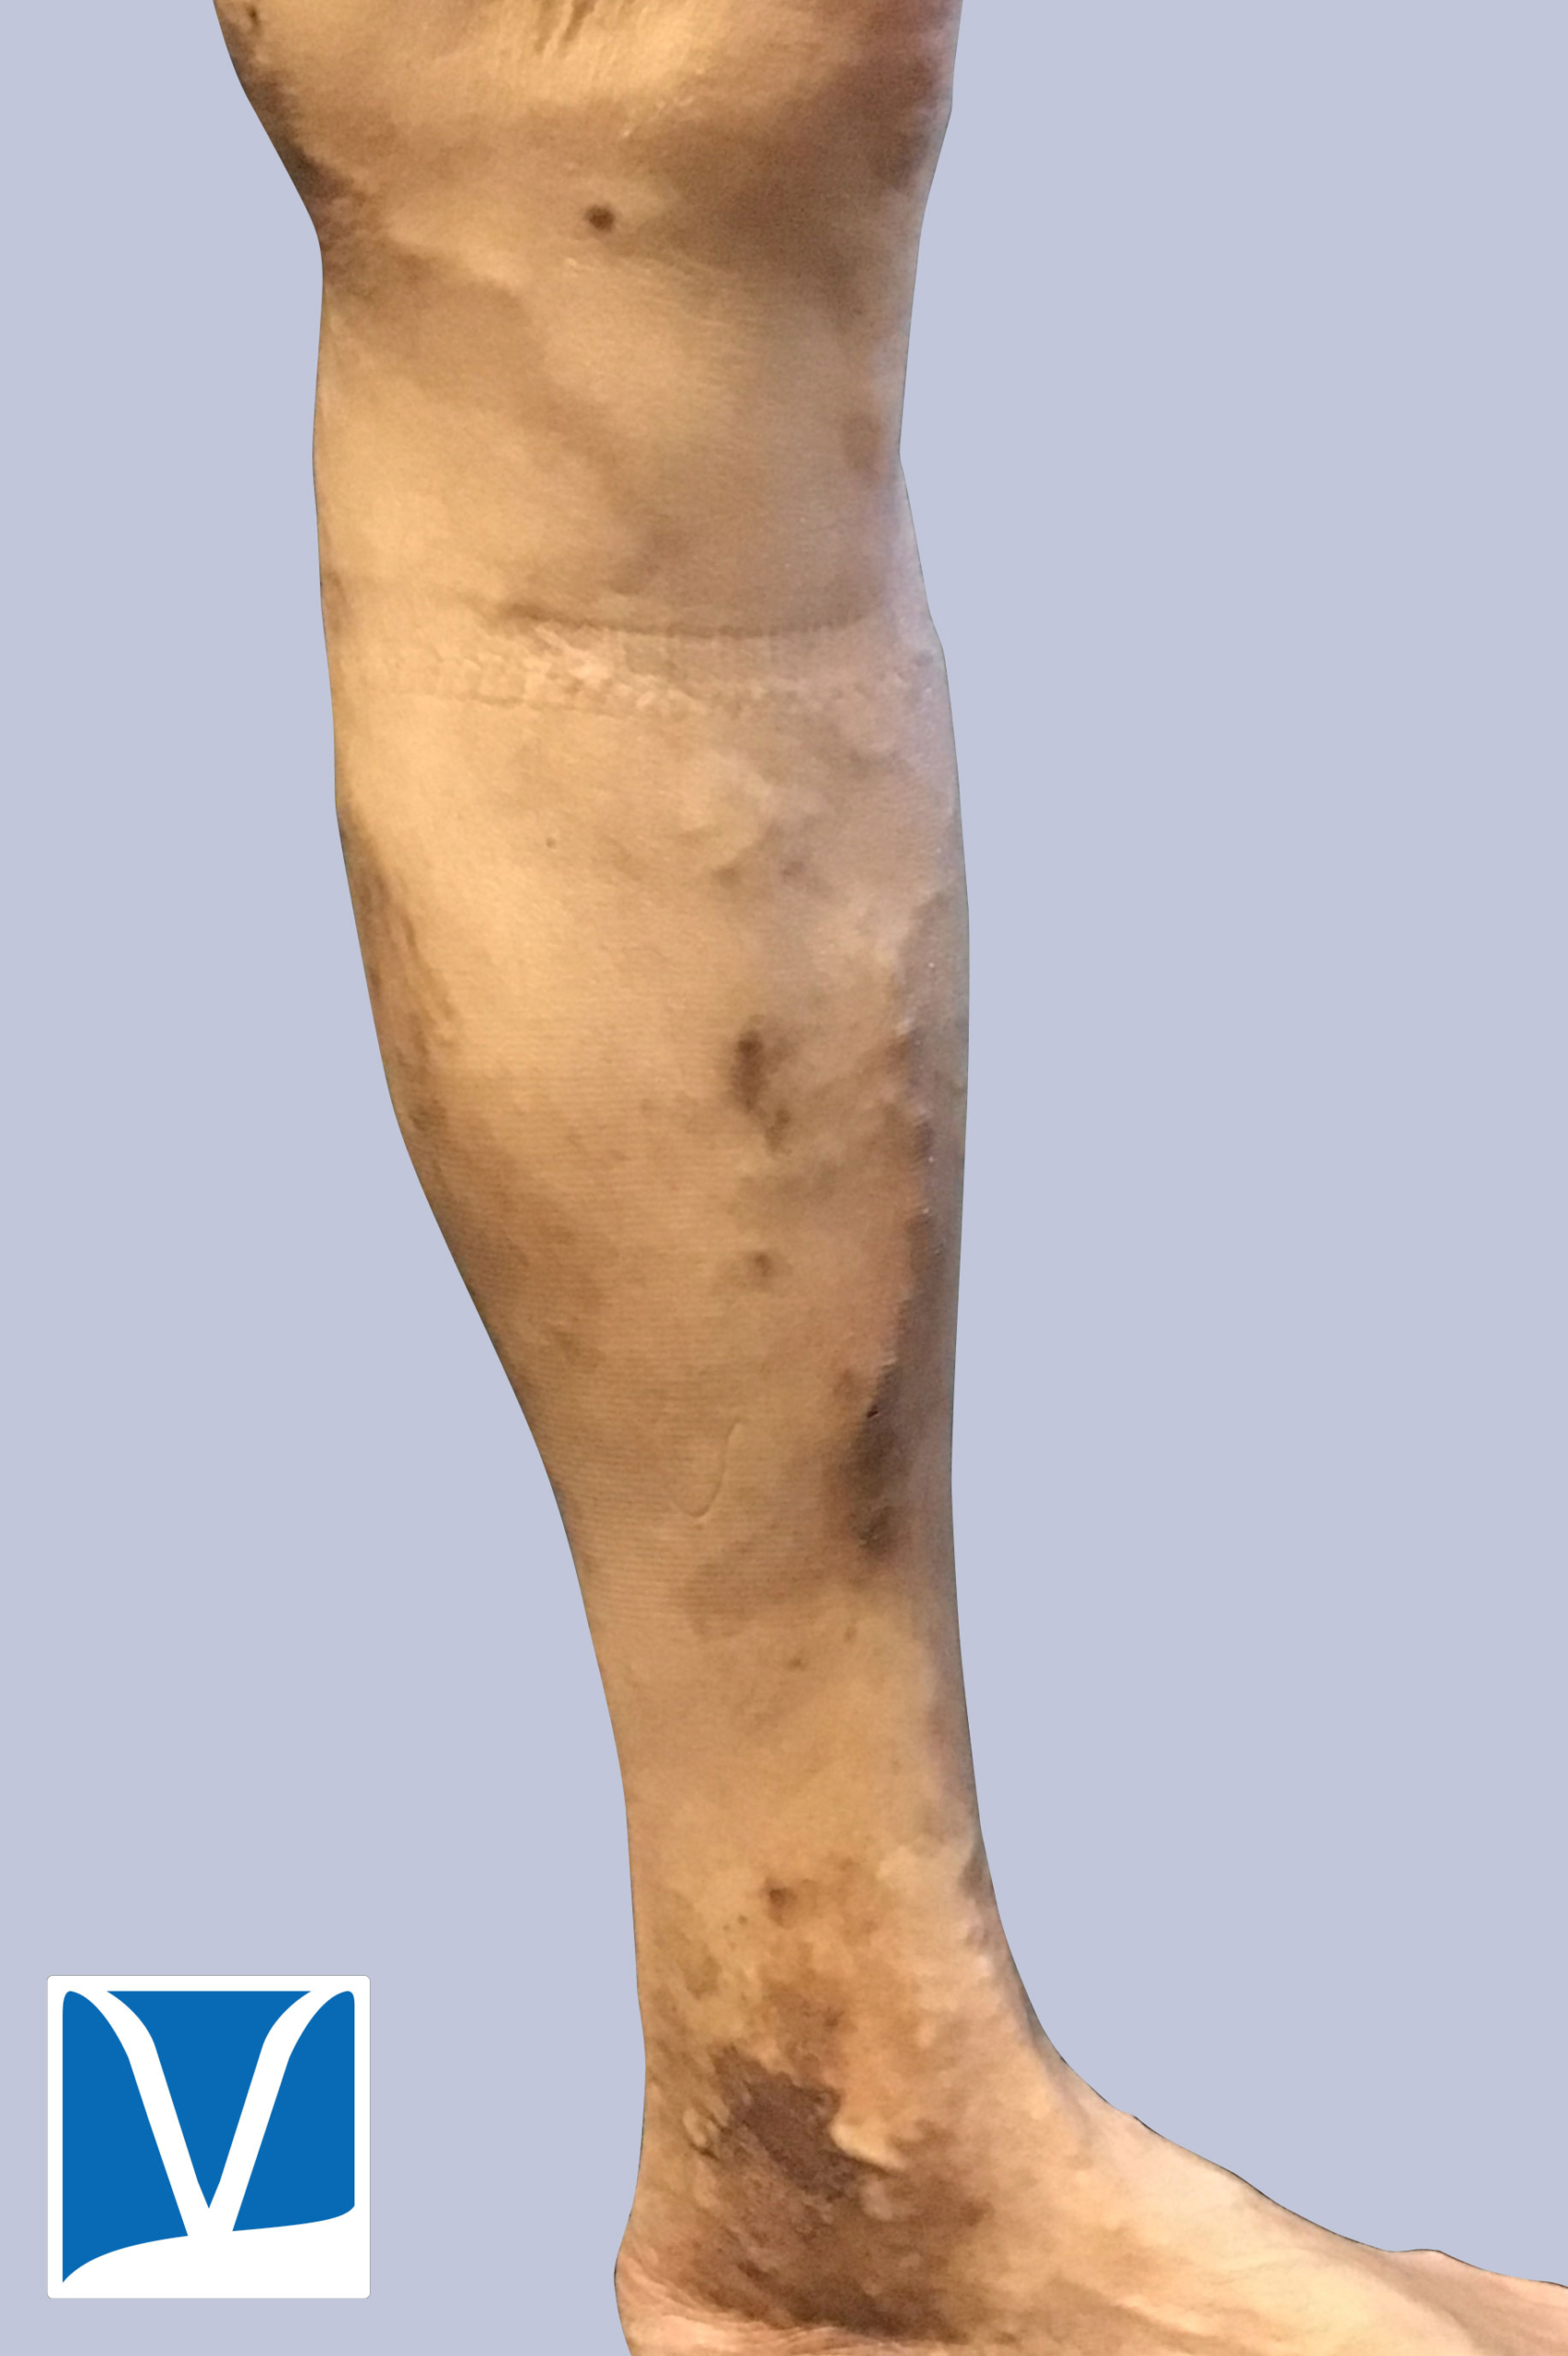 varicose veins after treatment results